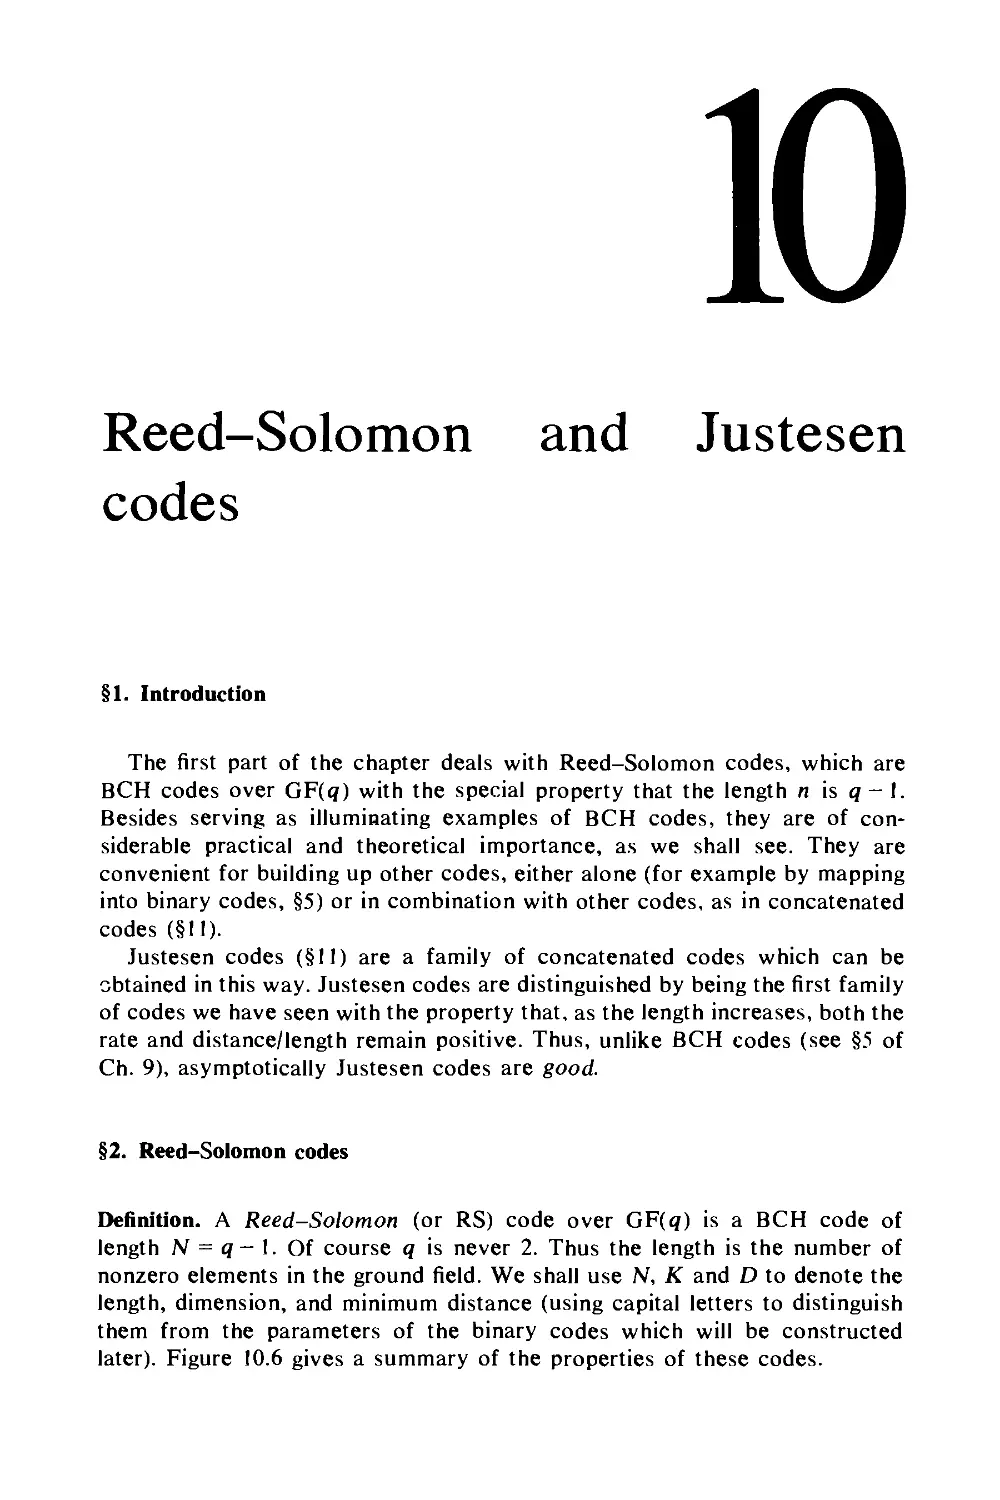 10. Reed-Solomon and Justesen codes